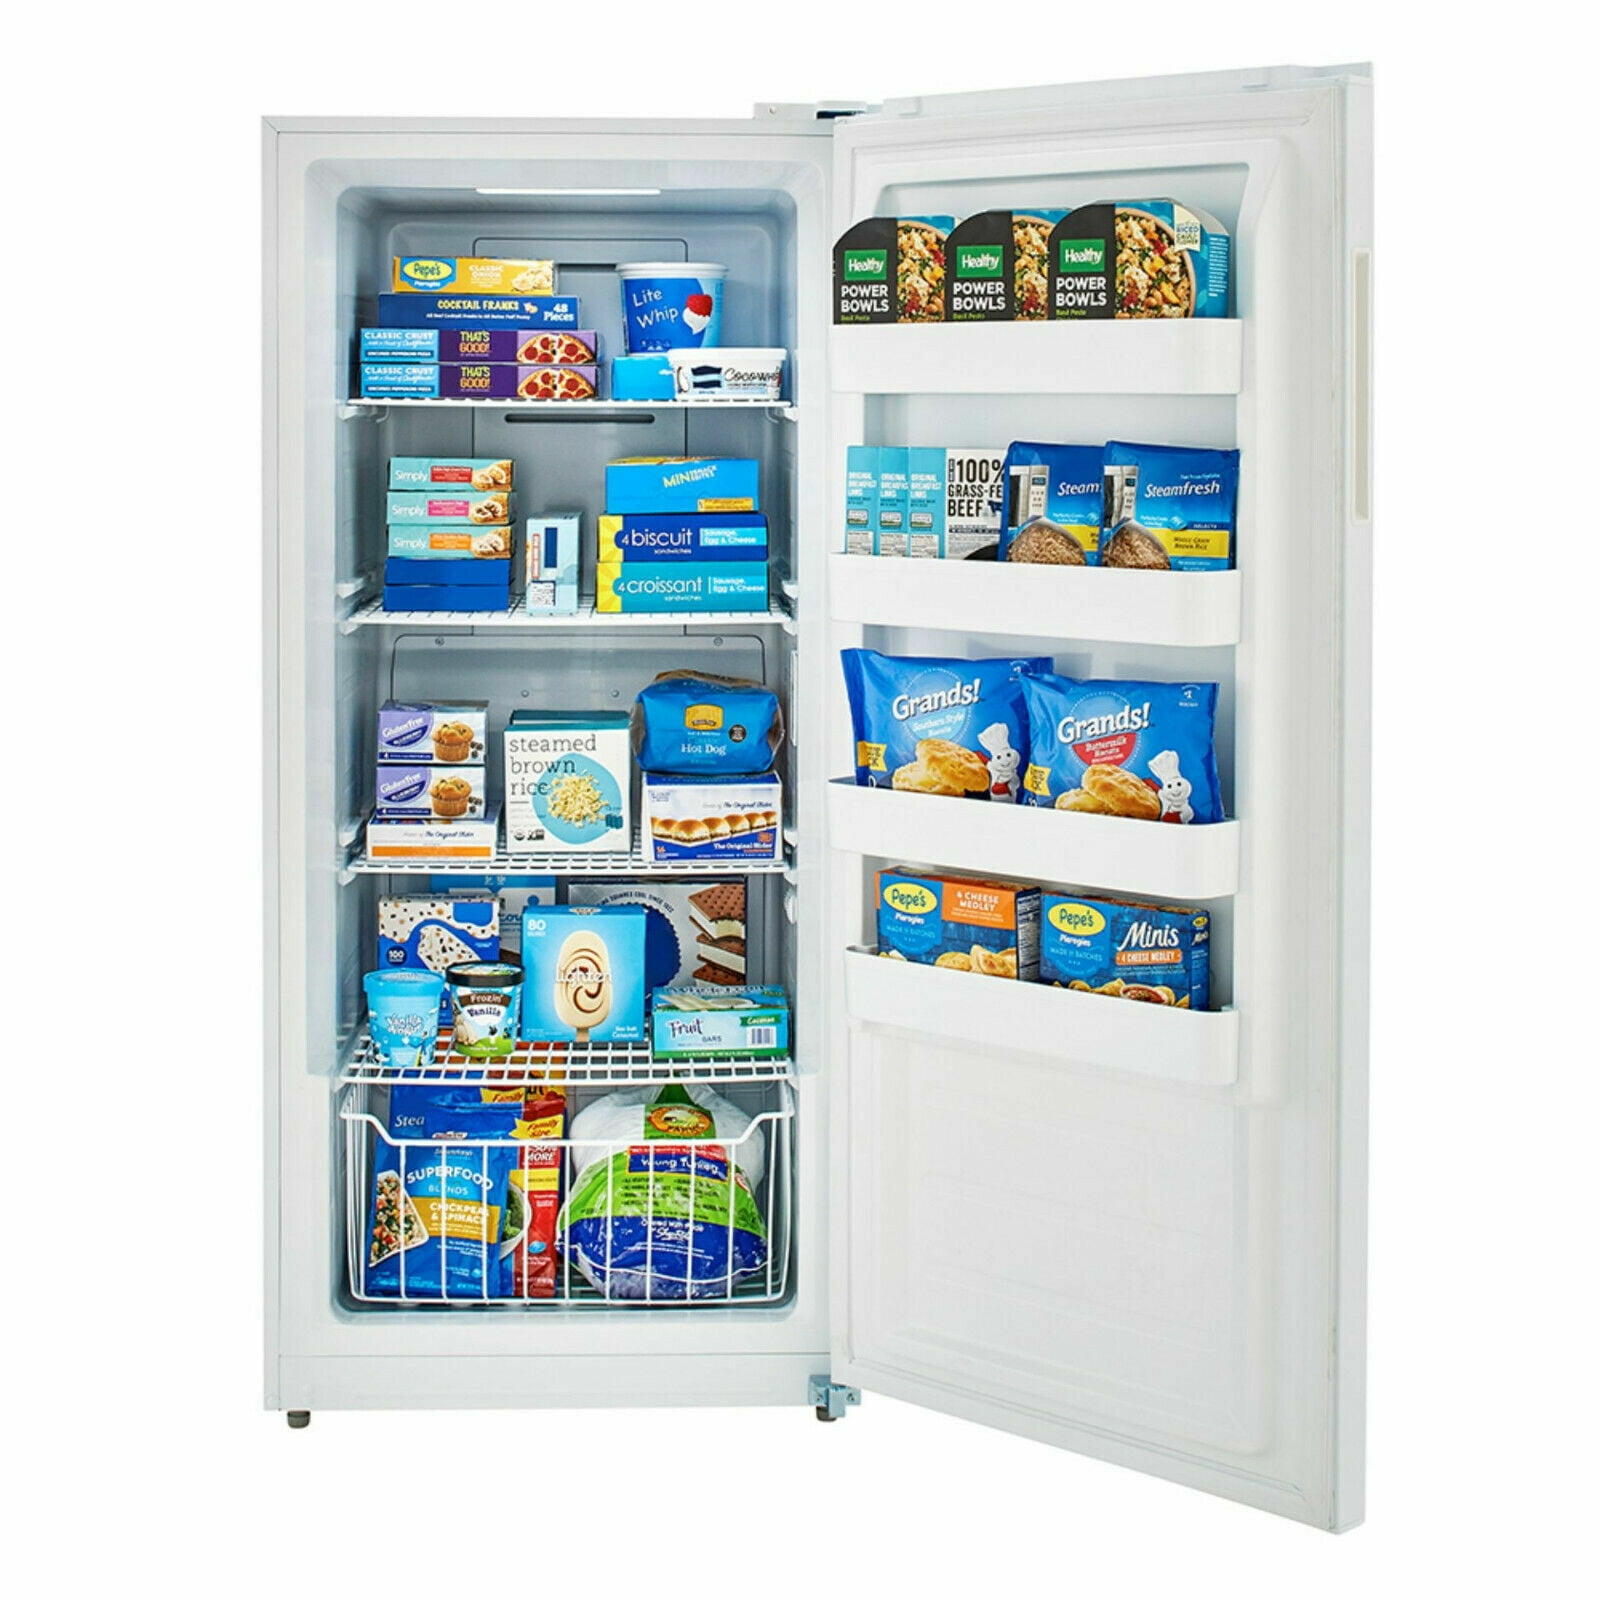 Igloo IUF3WH 3.0 Cu. Ft. Upright Freezer with 1 Pull Out Drawer